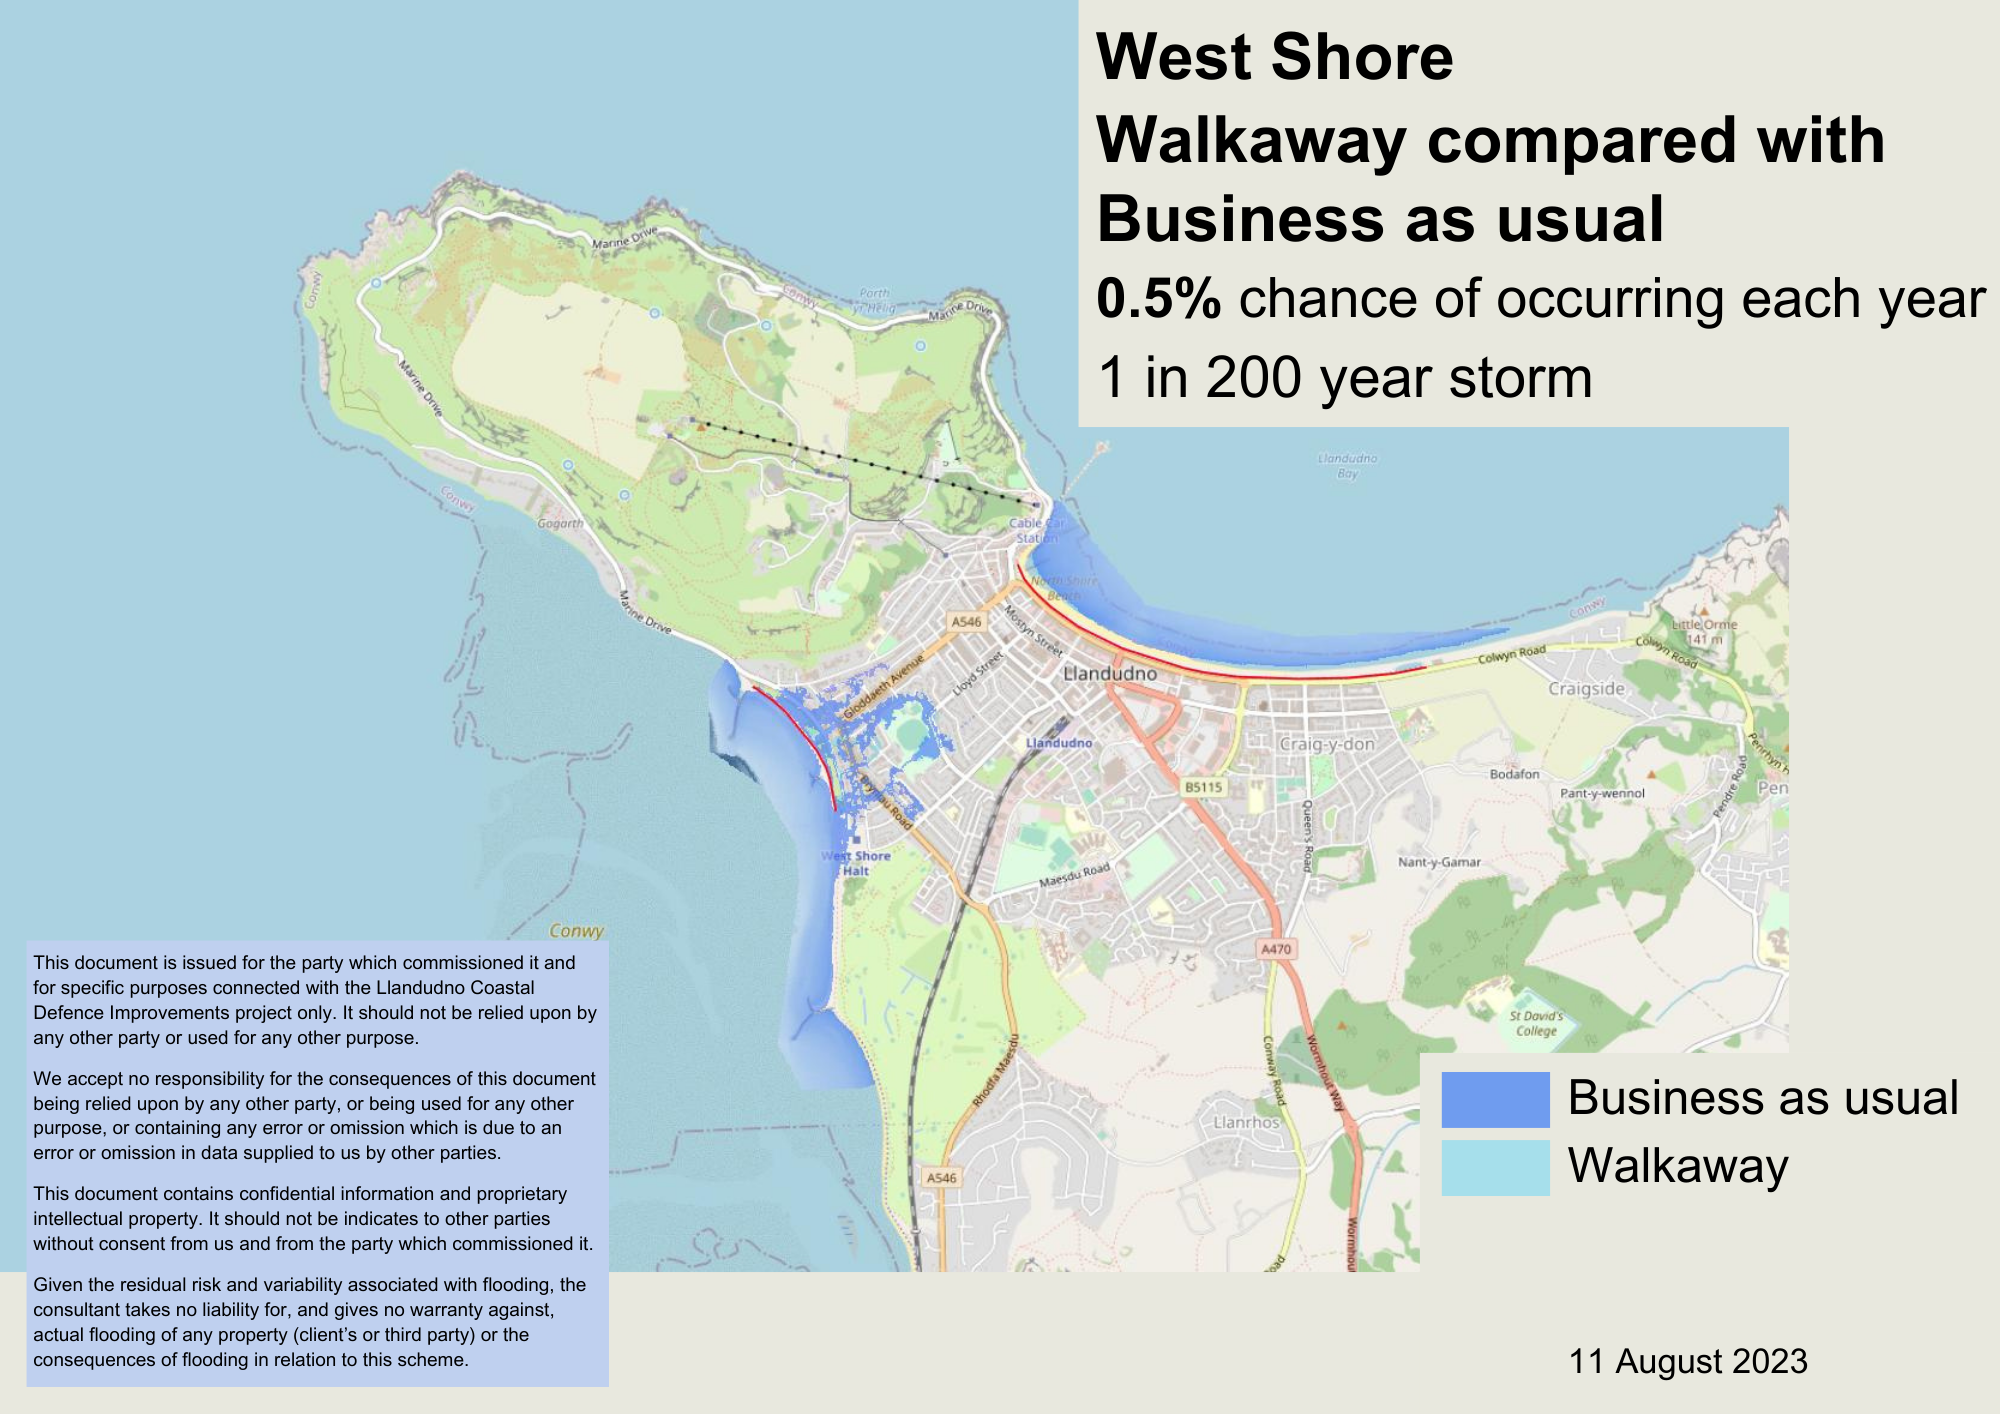 West Shore - Walkaway compared with business as usual in the 0.5% chance of flooding each year (1 in 200 years) scenario